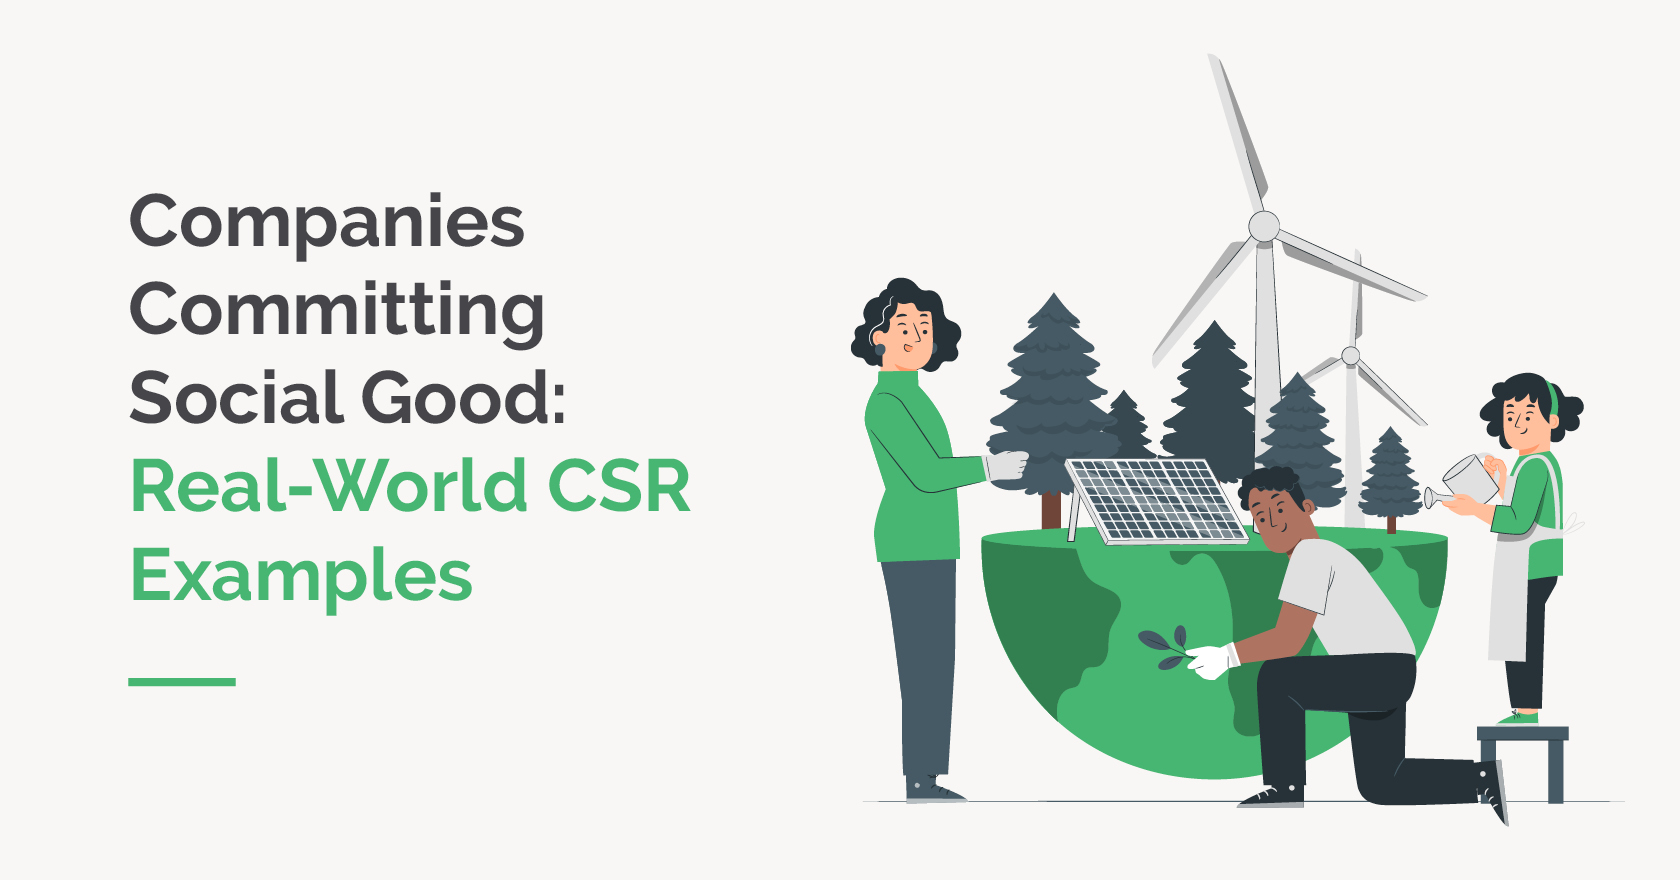 This article explores real world examples of companies' CSR programs.